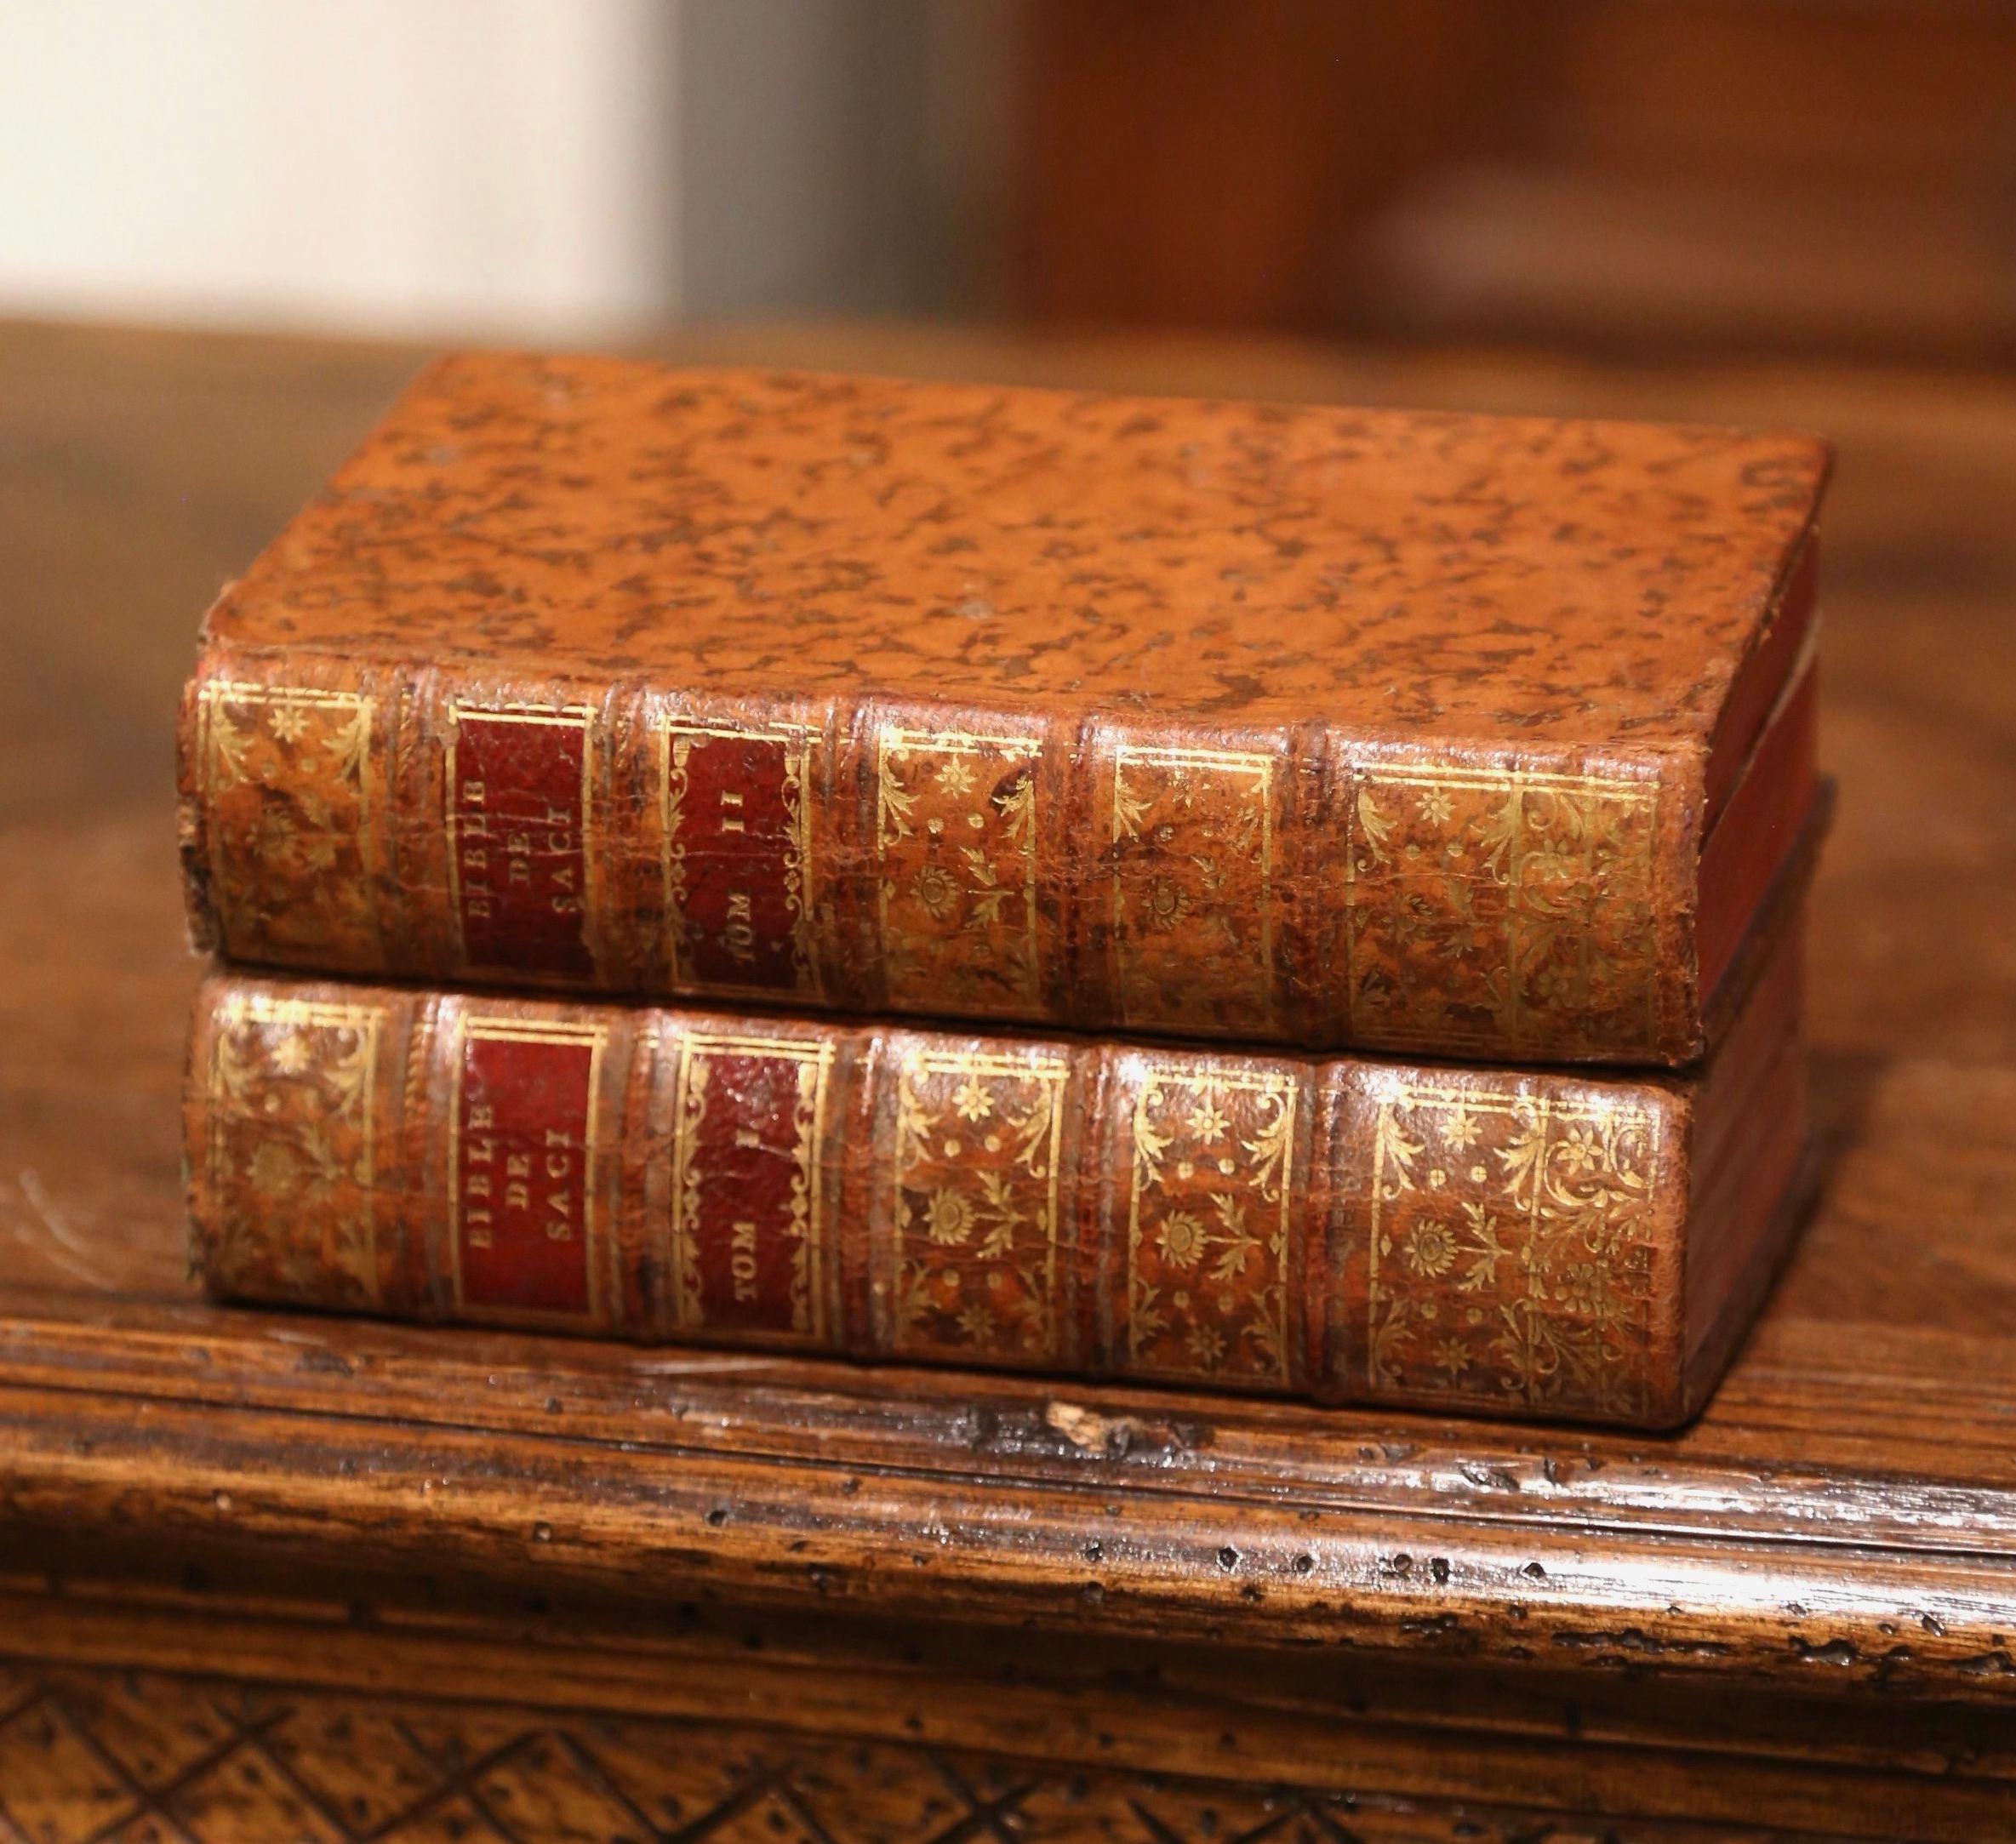 These Bible books with brown leather covers were printed in Paris, France. Dated 1743 and written in 